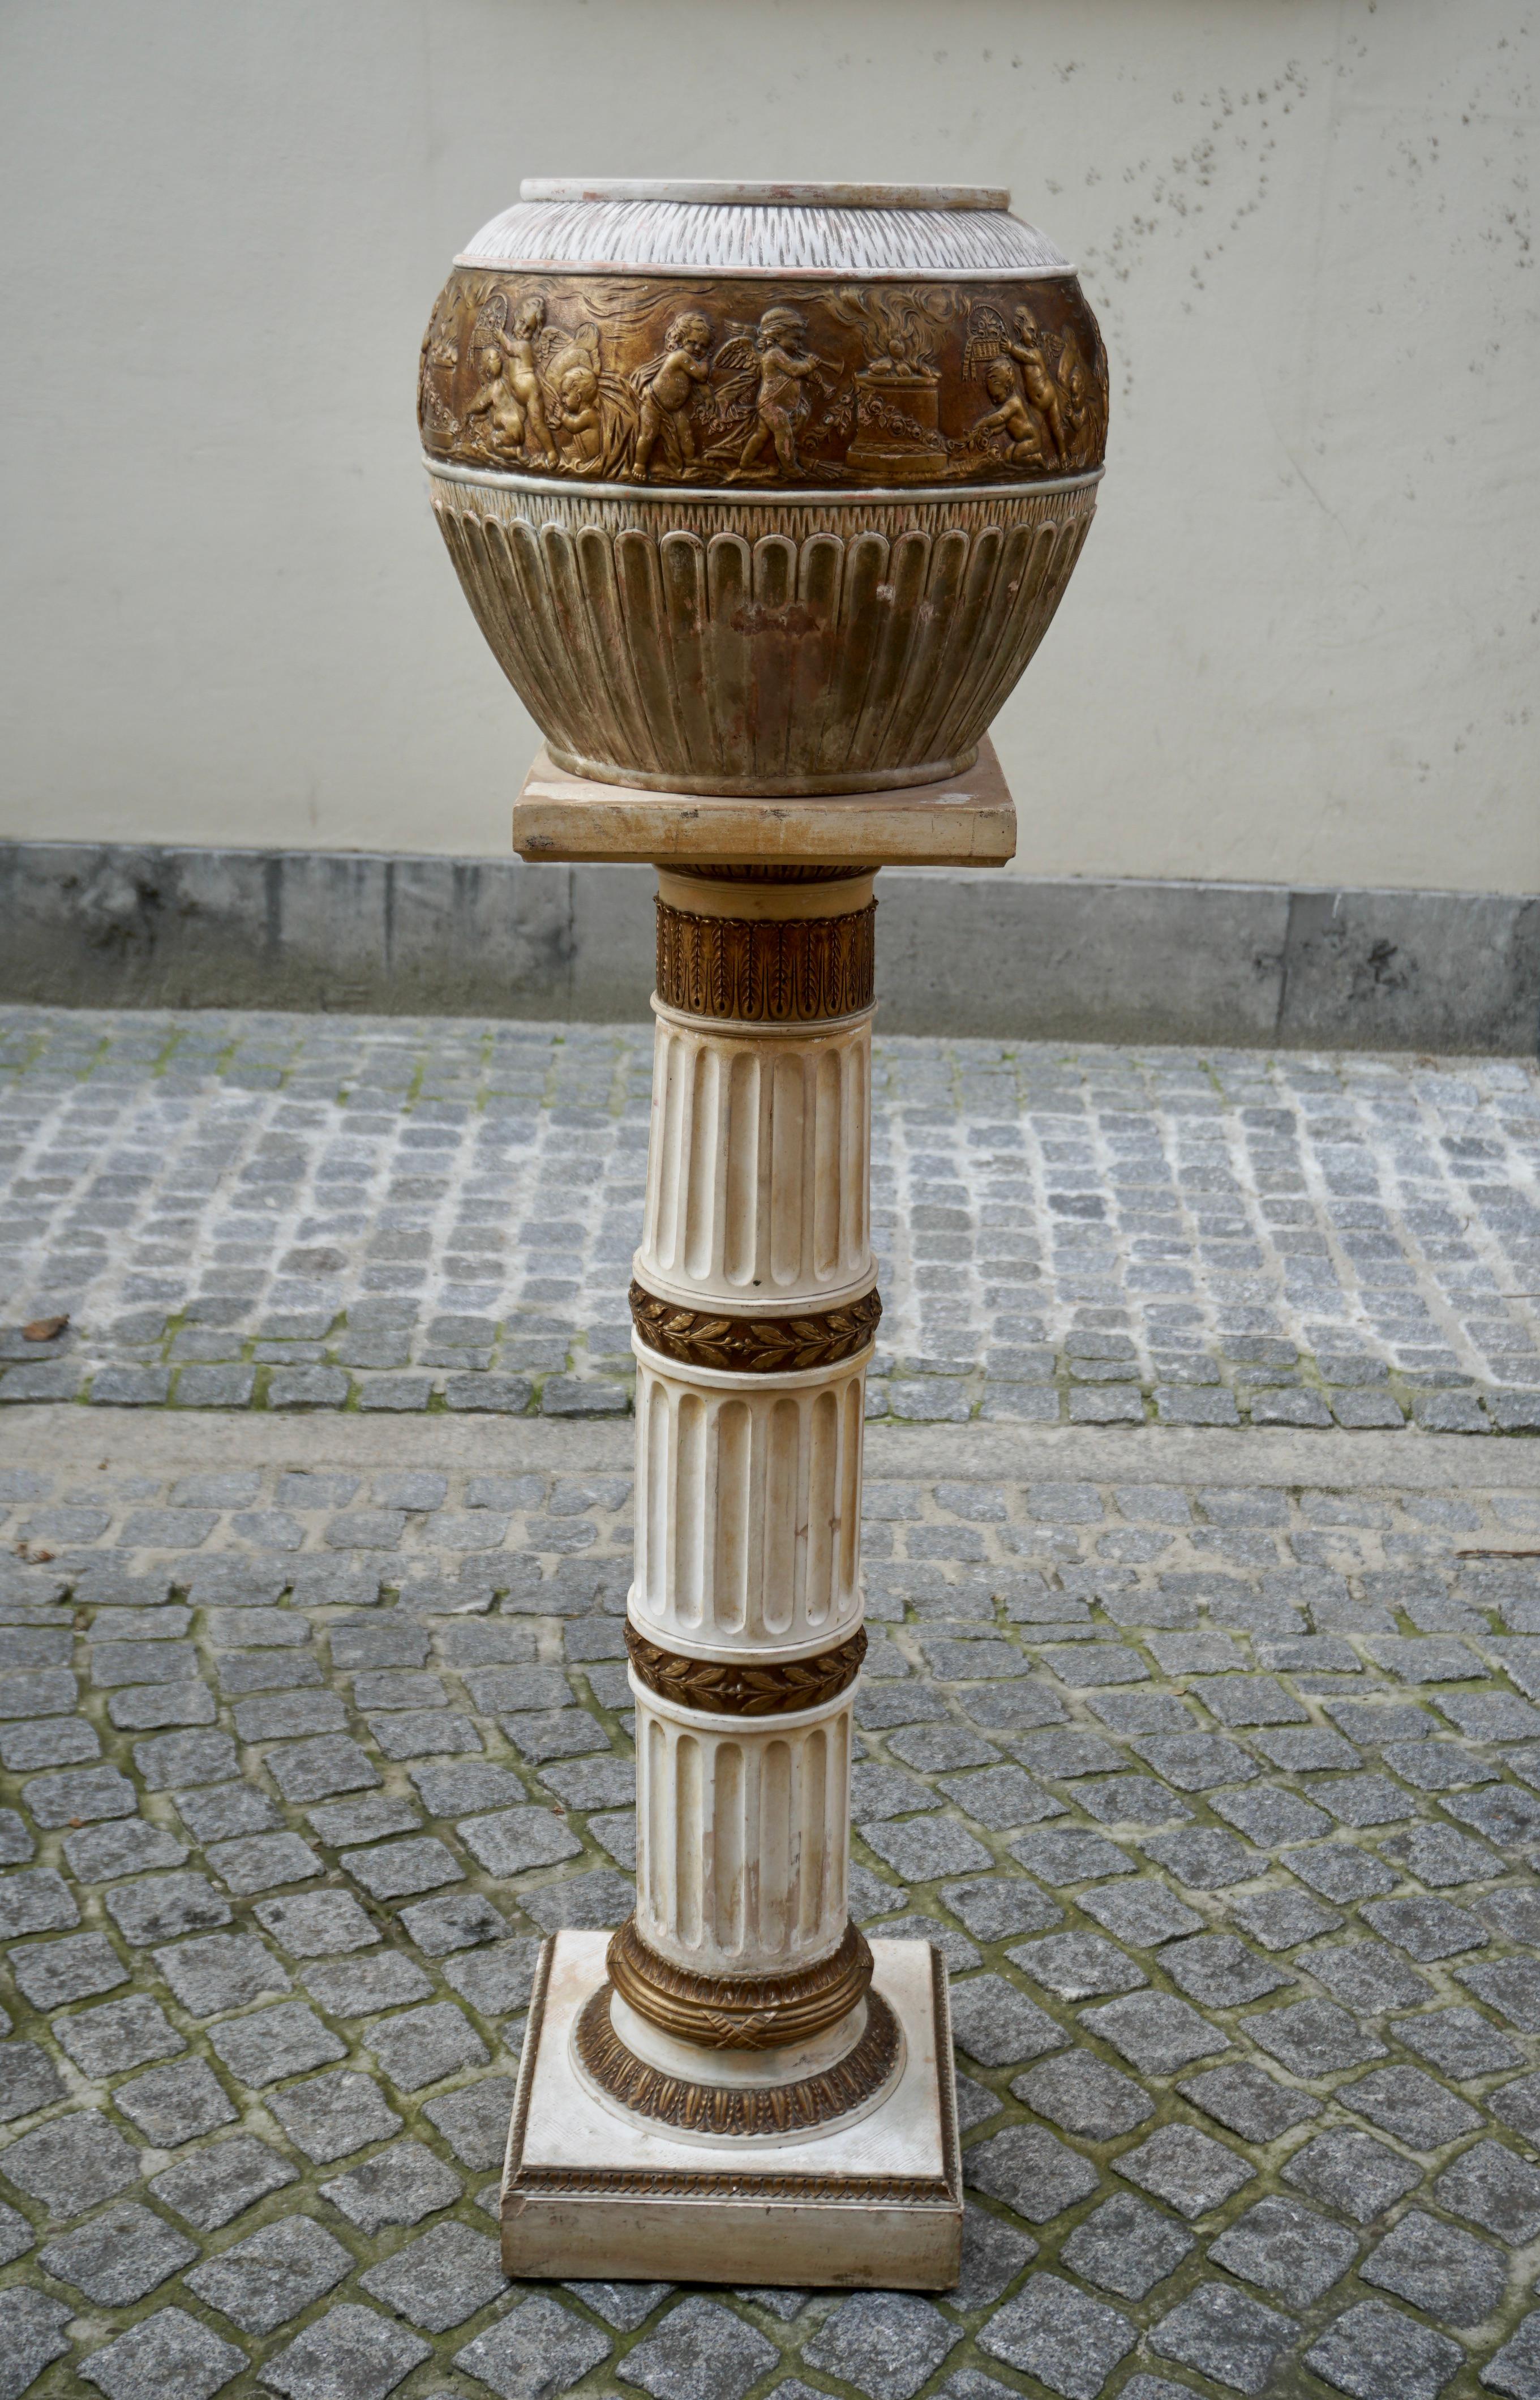 Ornate gilt pedestal terracotta planter pot stand decorated with putti cherub made in Napoli, Italy.

Condition Report column and jardiniere
In good, structurally sound and sturdy condition with some spotting mostly near the bases as shown. The